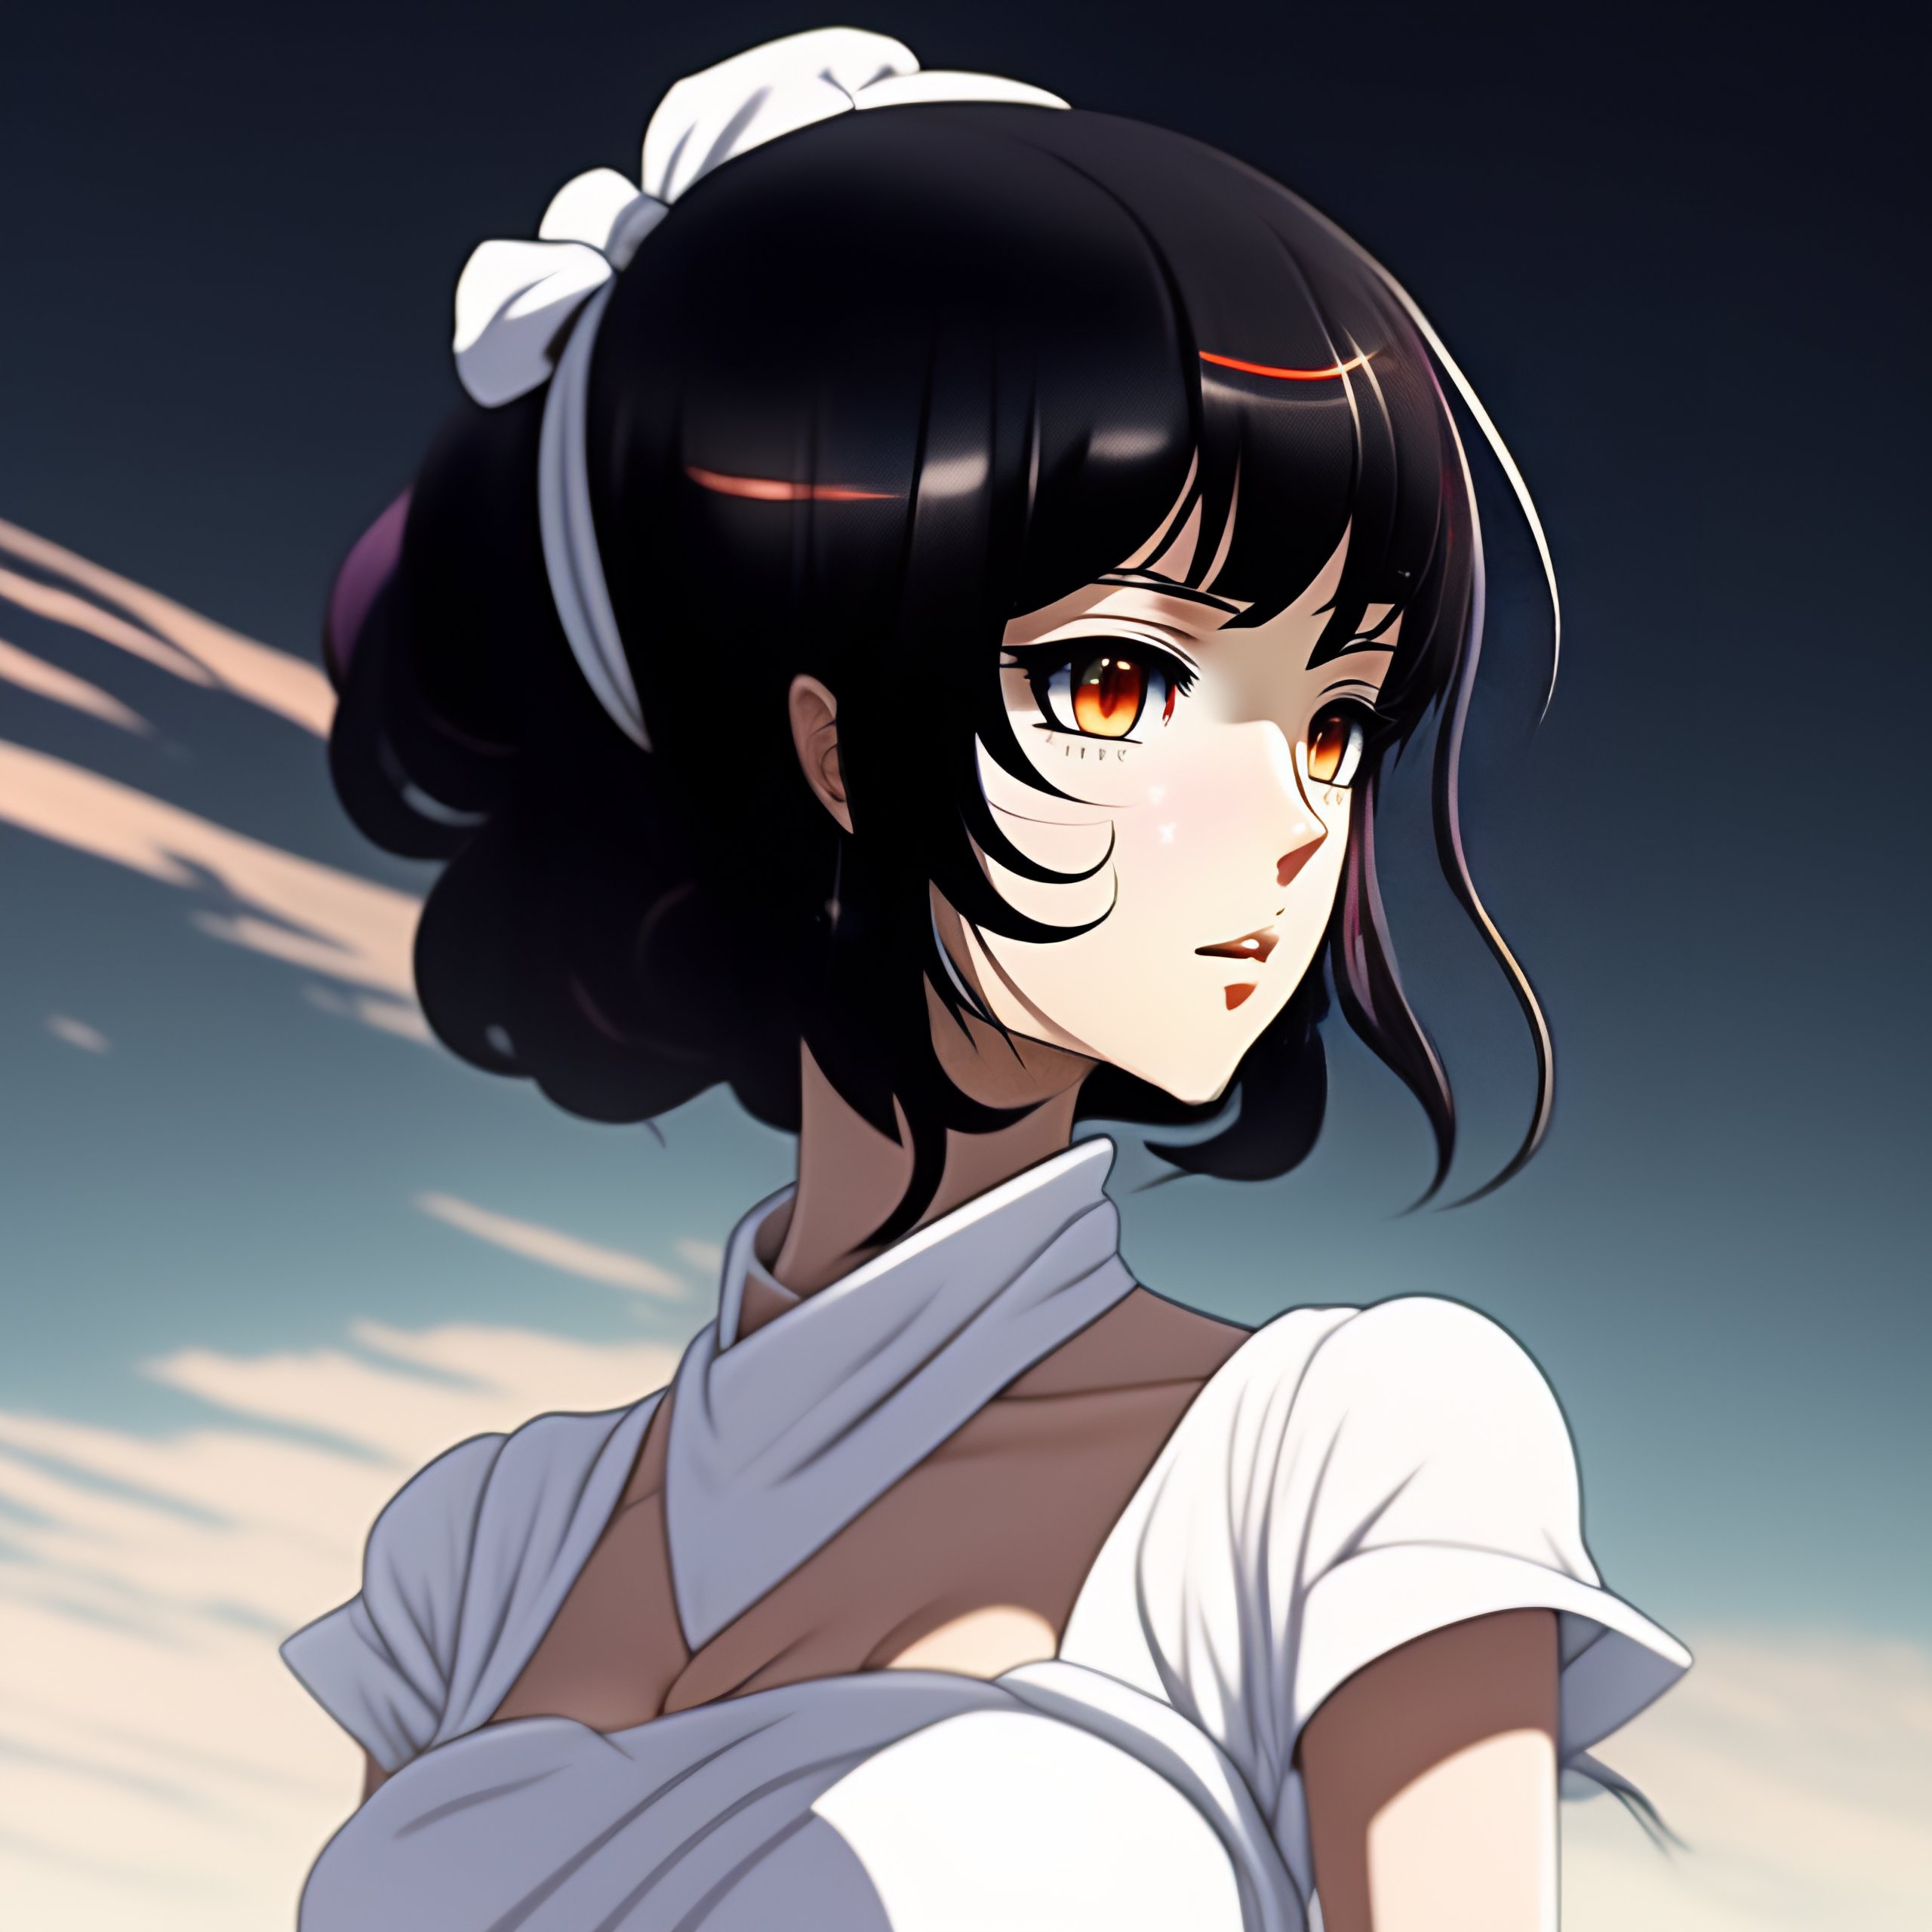 Lexica - Anime style, woman standing facing away from camera, black hair,  wearing a white dress